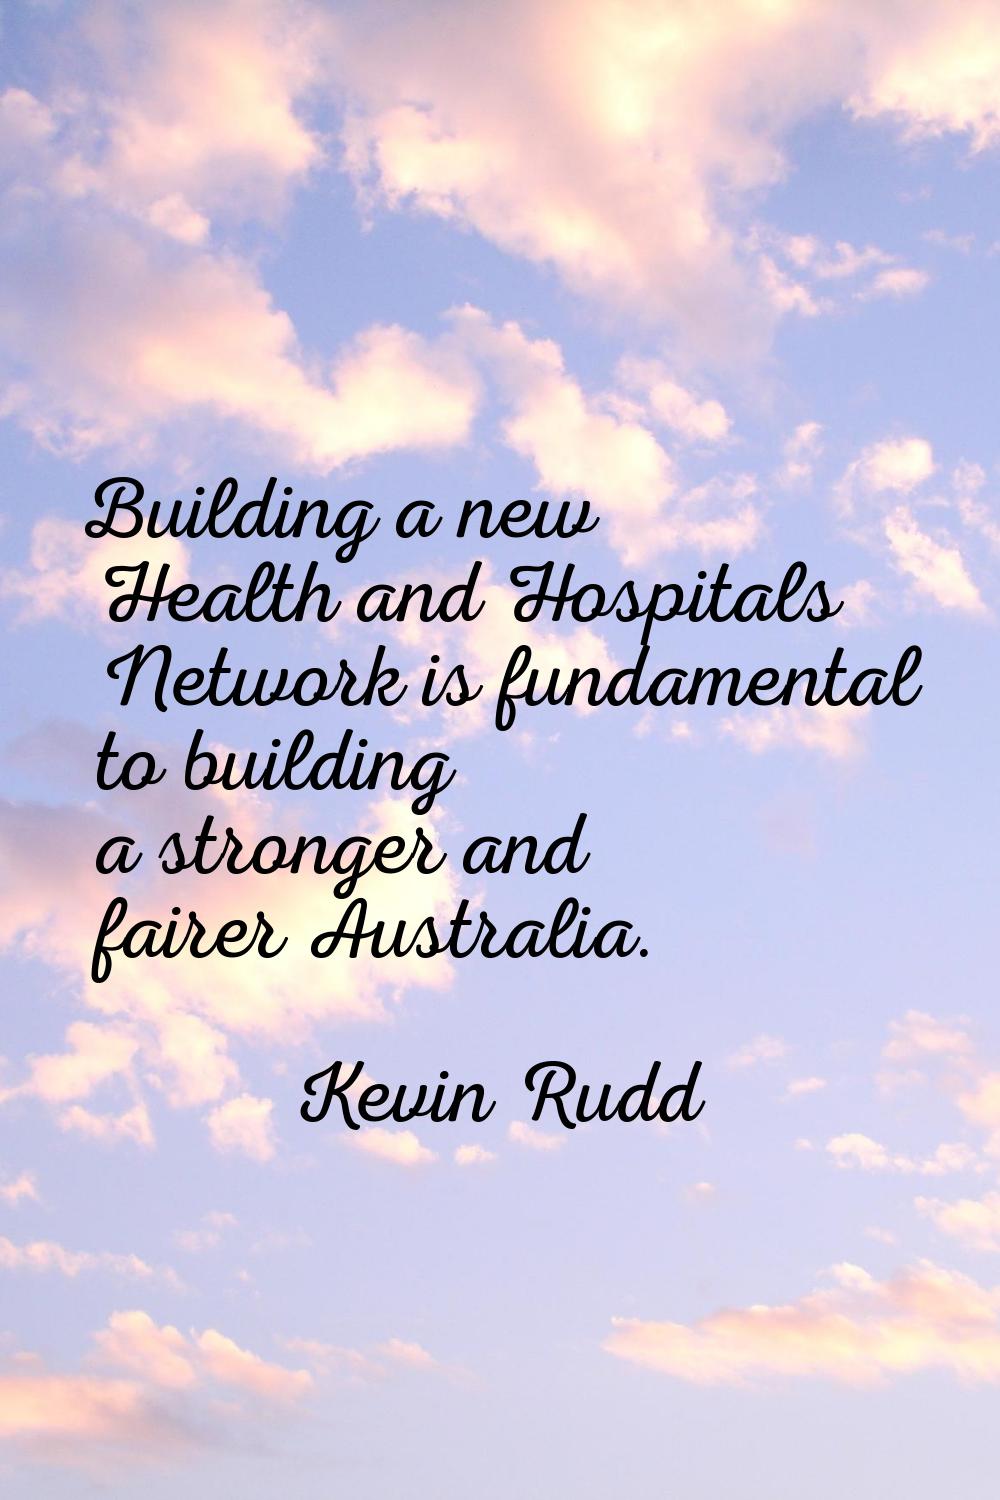 Building a new Health and Hospitals Network is fundamental to building a stronger and fairer Austra